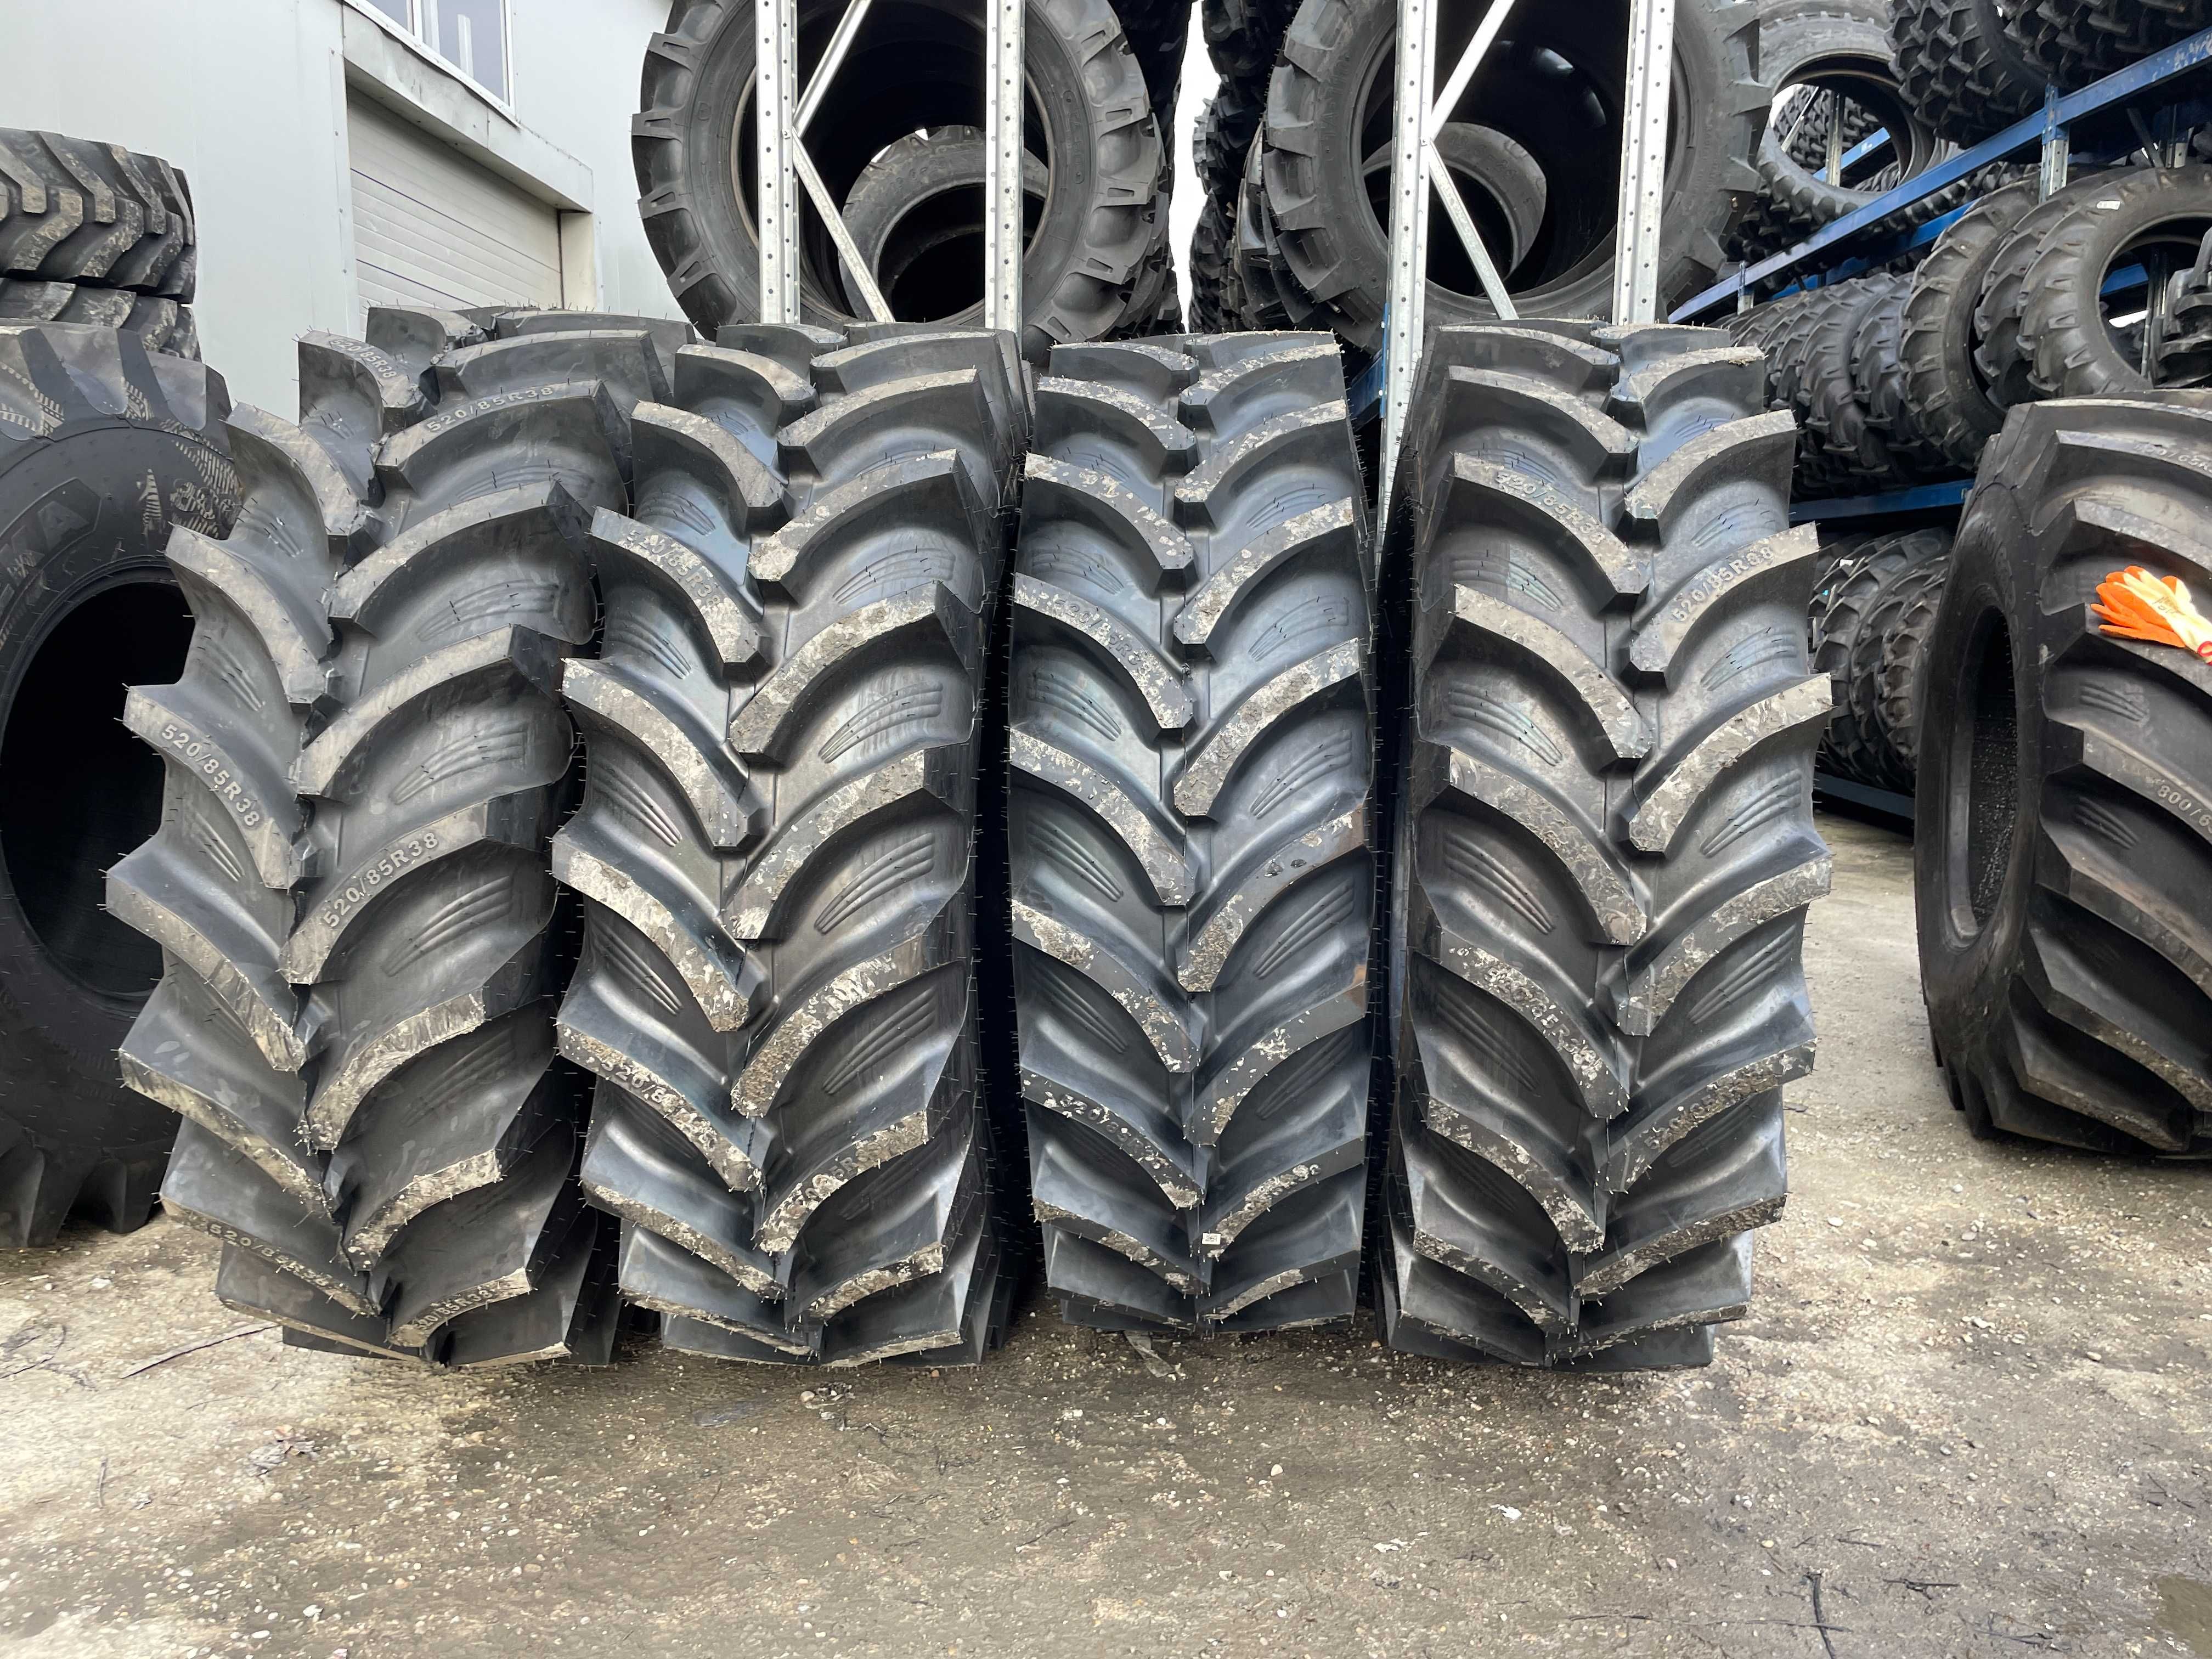 Anvelope agricole de tractor spate Radiale Tubeless 20.8-38  520/85R38